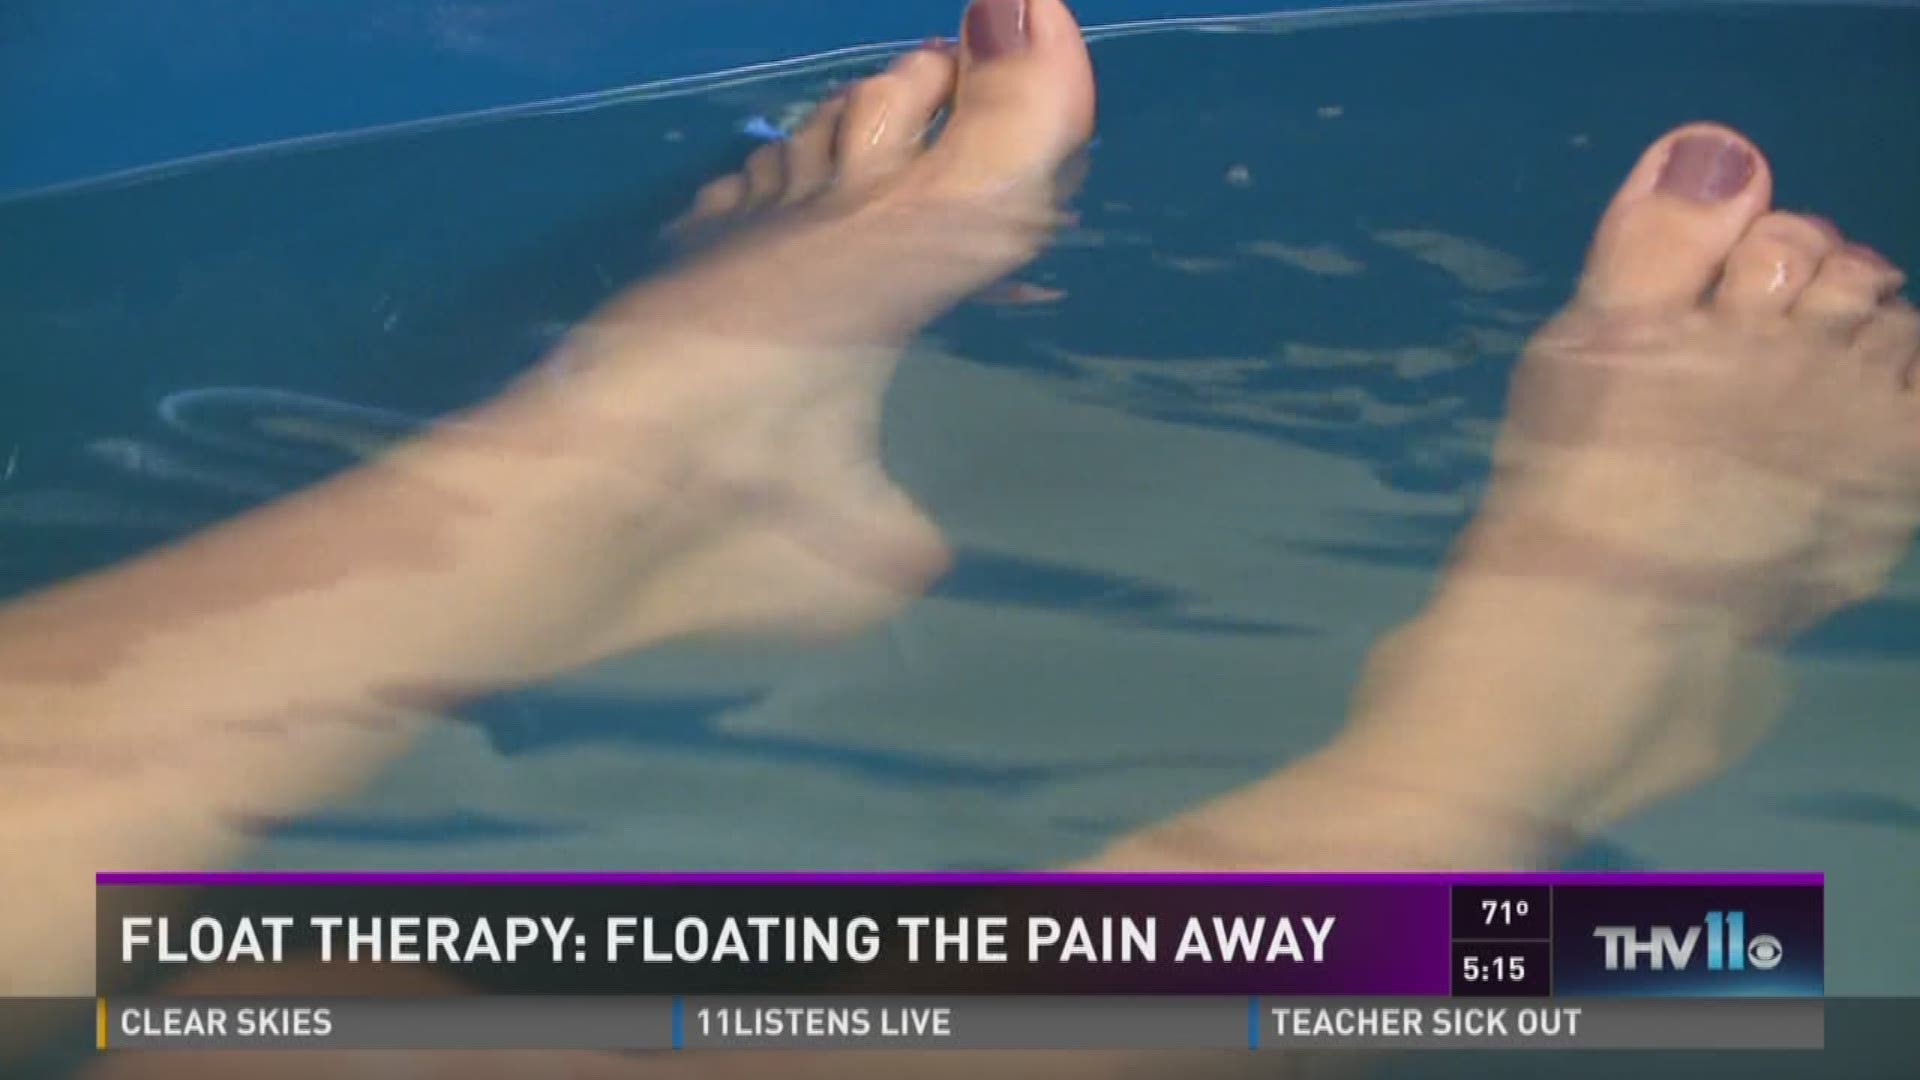 THV11's Laura Monteverdi takes a dip inside the world of Float Therapy to show us why so many people are immersing themselves in this unique health trend